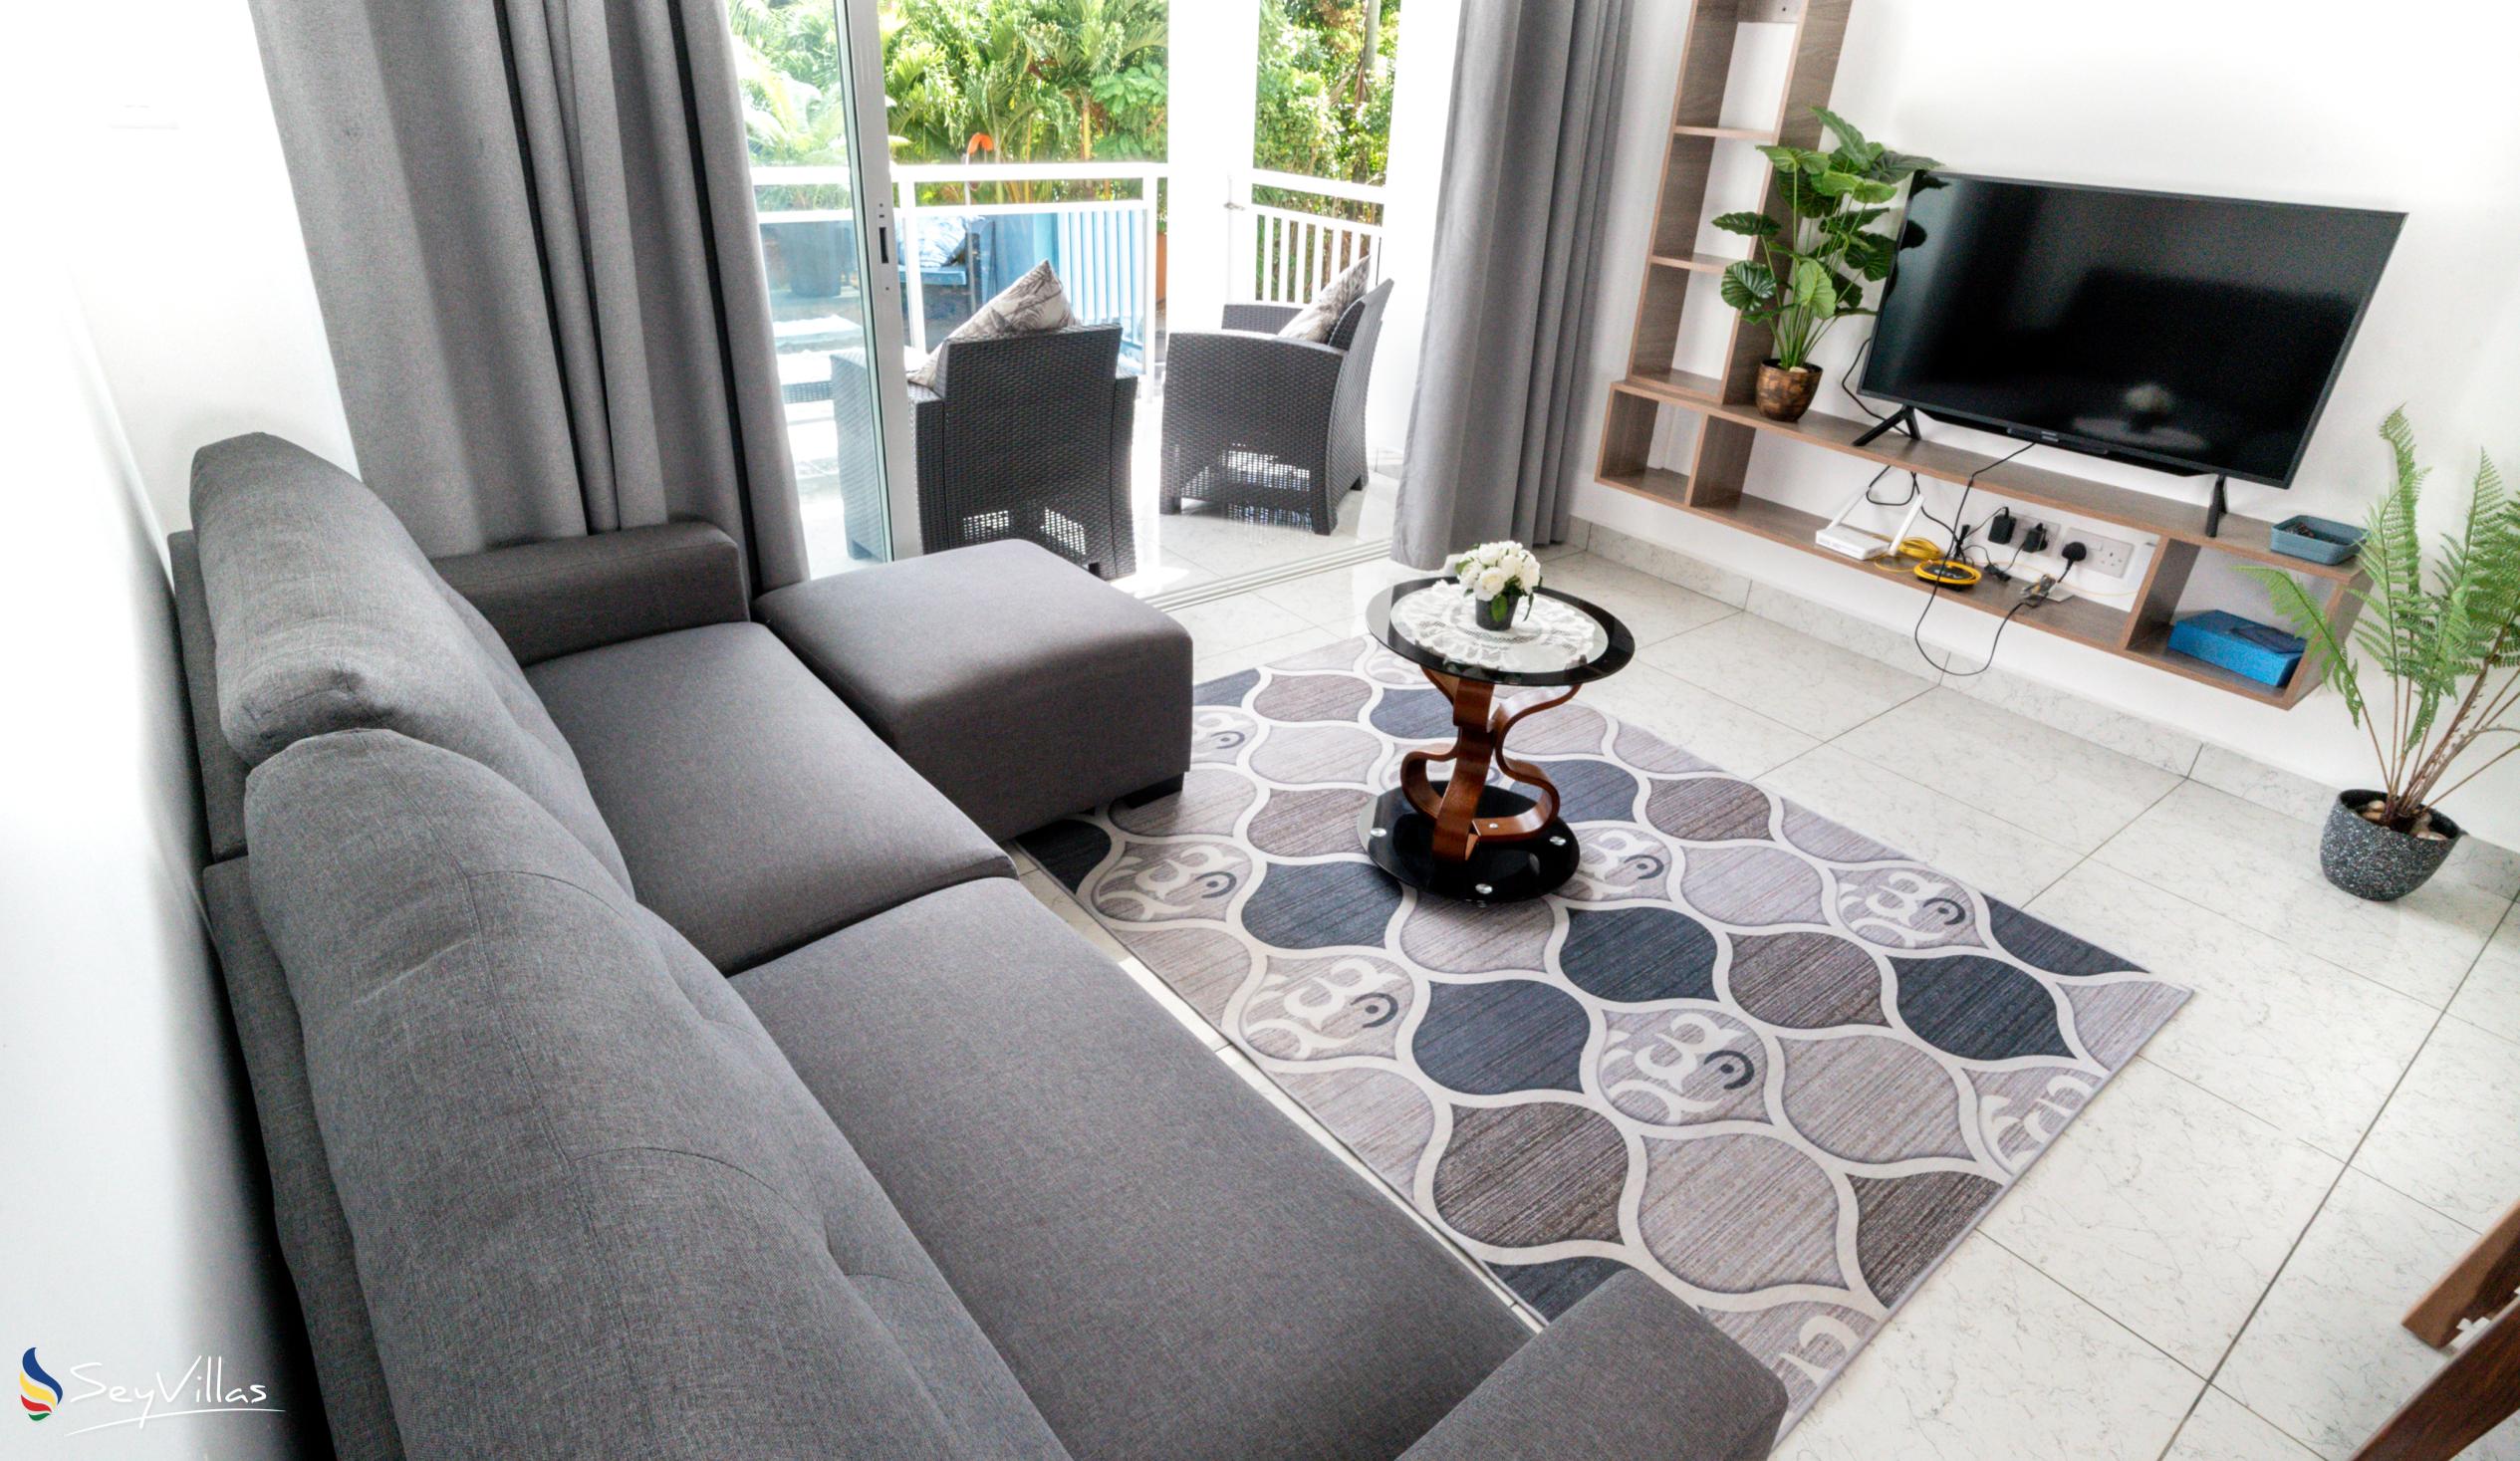 Photo 27: TES Self Catering - 1-Bedroom Apartment - Mahé (Seychelles)